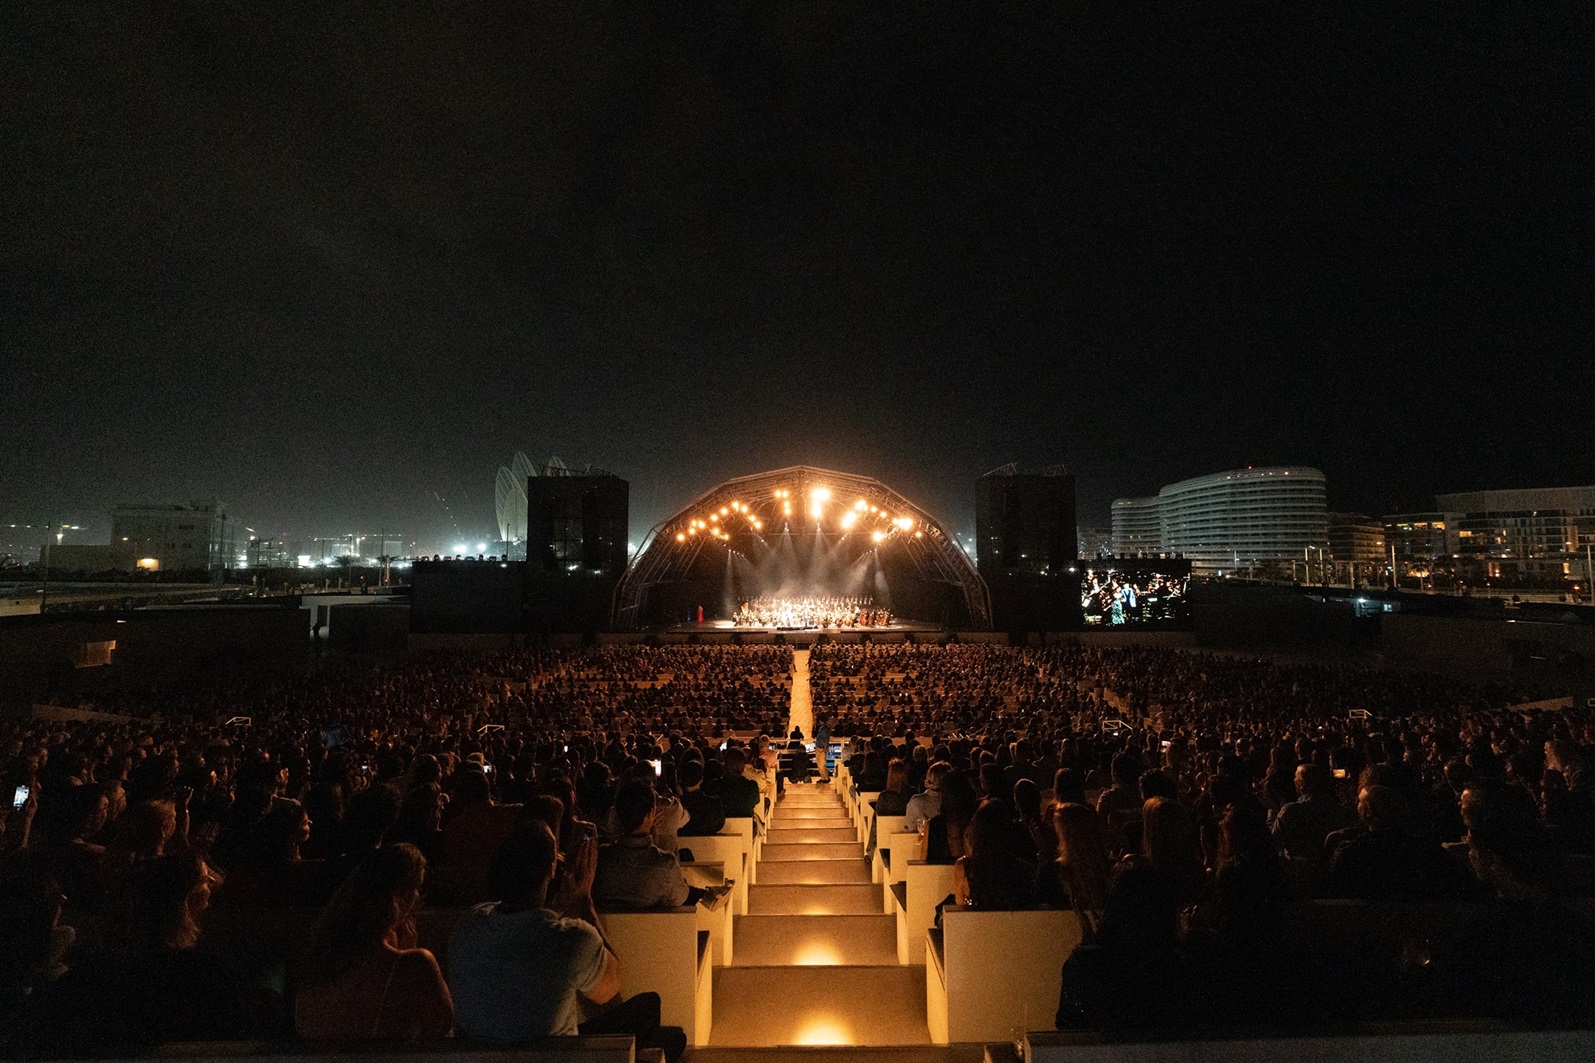 The three month Saadiyat Nights open air concert series is set against the backdrop of Saadiyat Island vistas and brings together a diverse line up of legendary glob